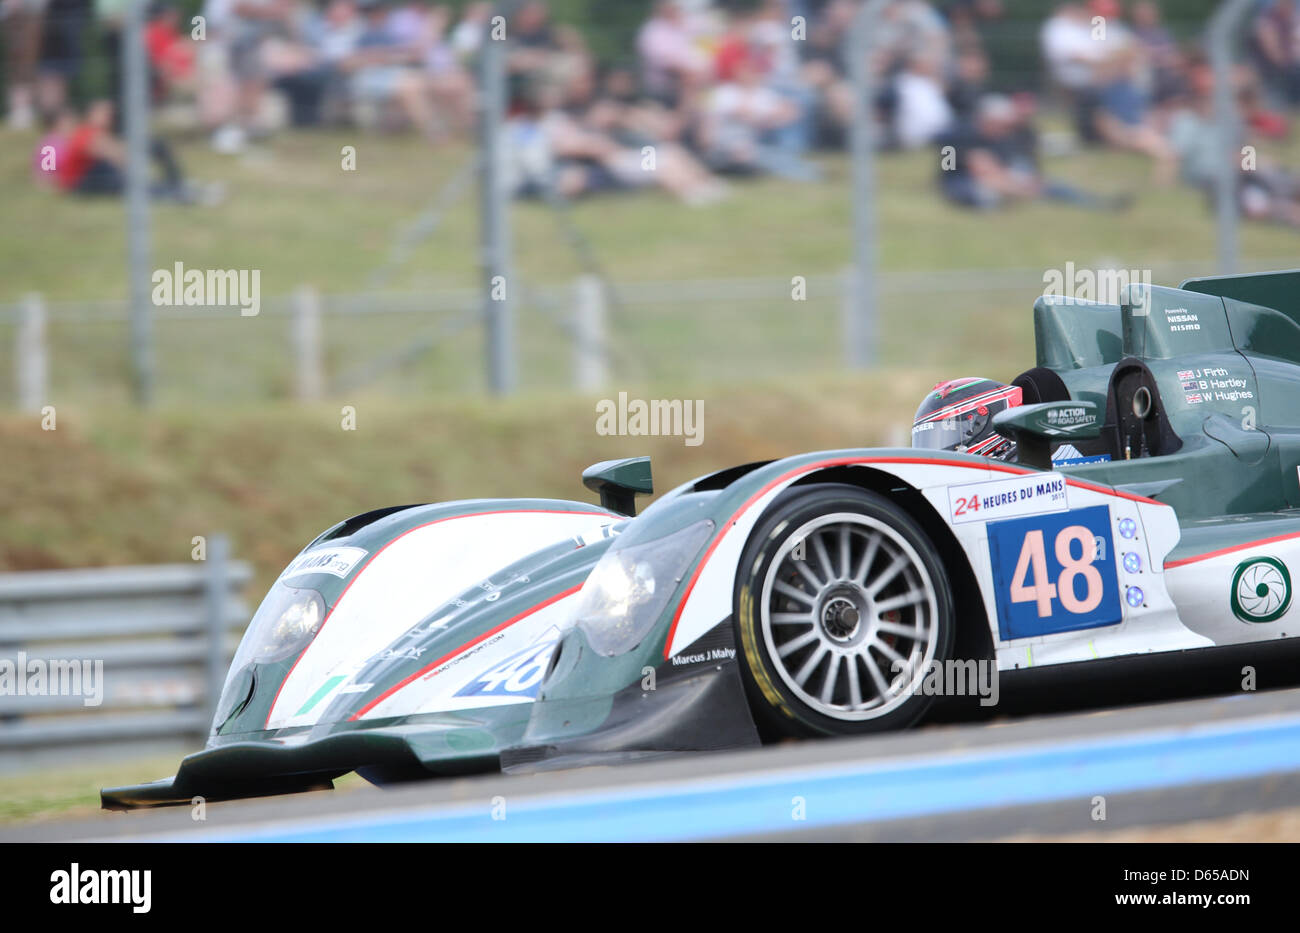 The LMP2 class Oreca 03 of Murphy Prototypes with drivers Jody Firth, Brendon Hartley and Warren Hughes in action during the qualifying for the 80th 24 Hours Race of Le Mans on the Circuit de la Sarthe in Le Mans, France 14 June 2012. Photo: Florian Schuh dpa Stock Photo